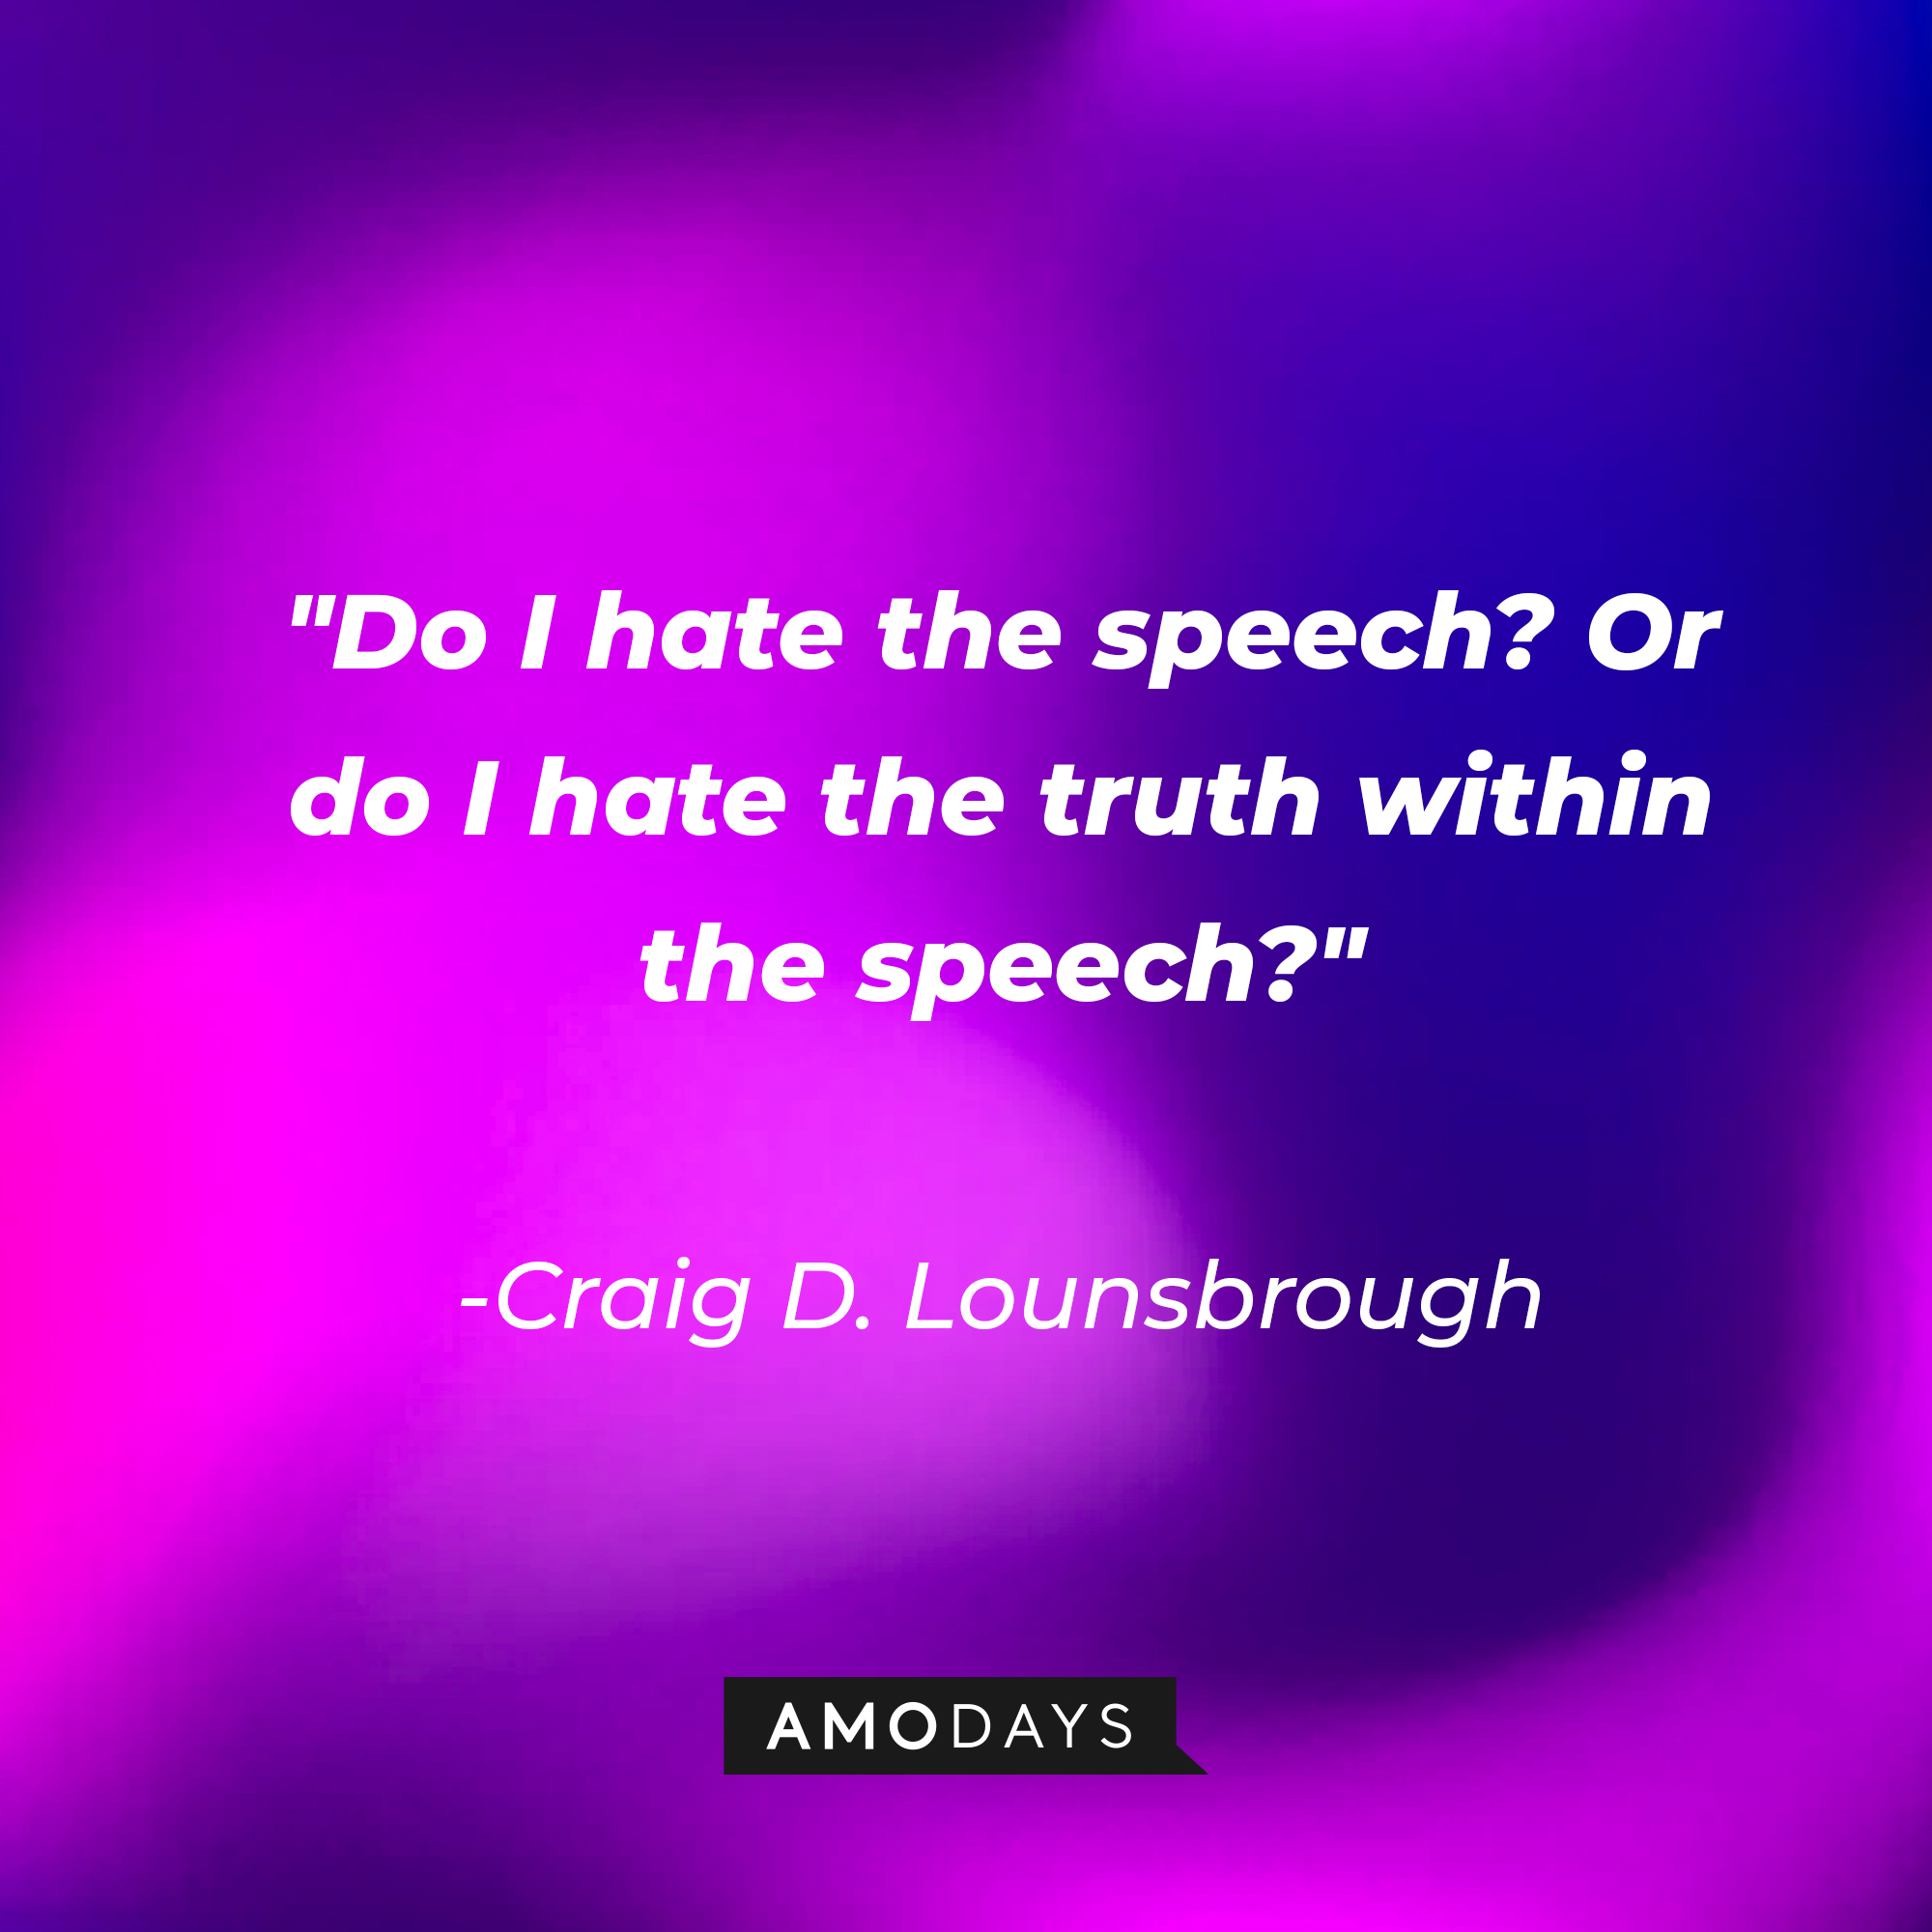 Craig D. Lounsbrough's quote: "Do I hate the speech? Or do I hate the truth within the speech?" | Source: AmoDays